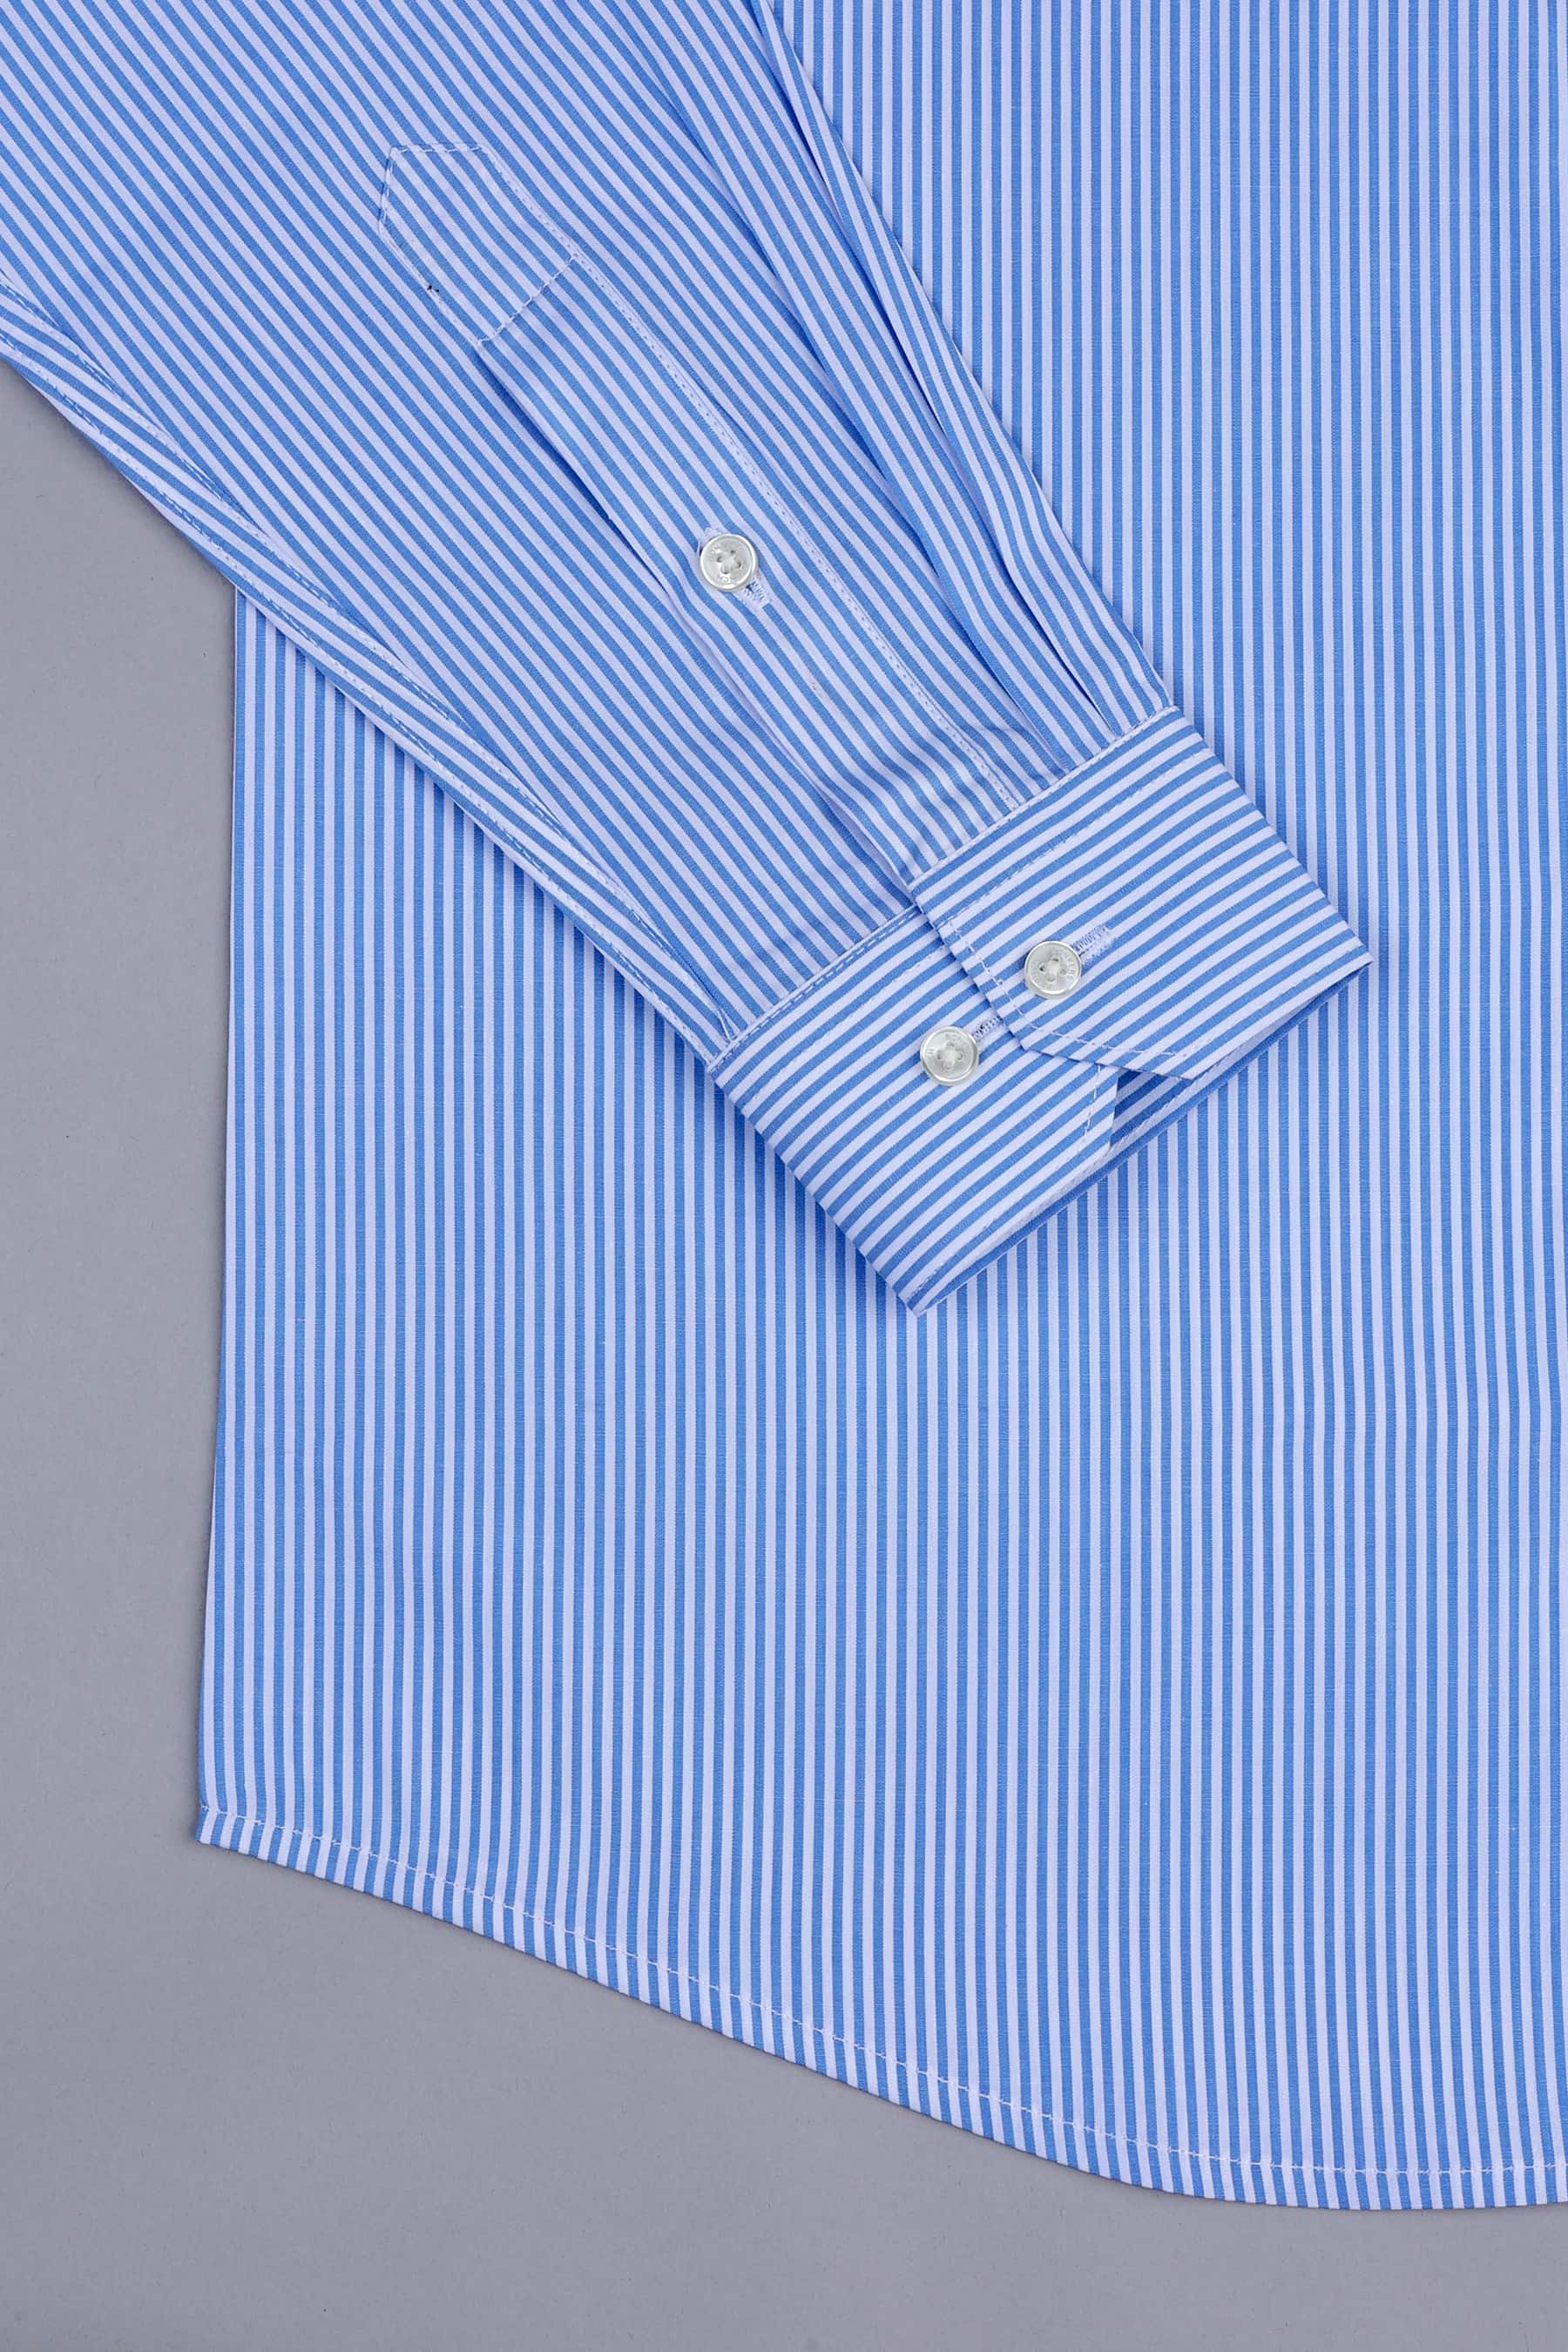 White with UN blue lines bengal stripe shirt